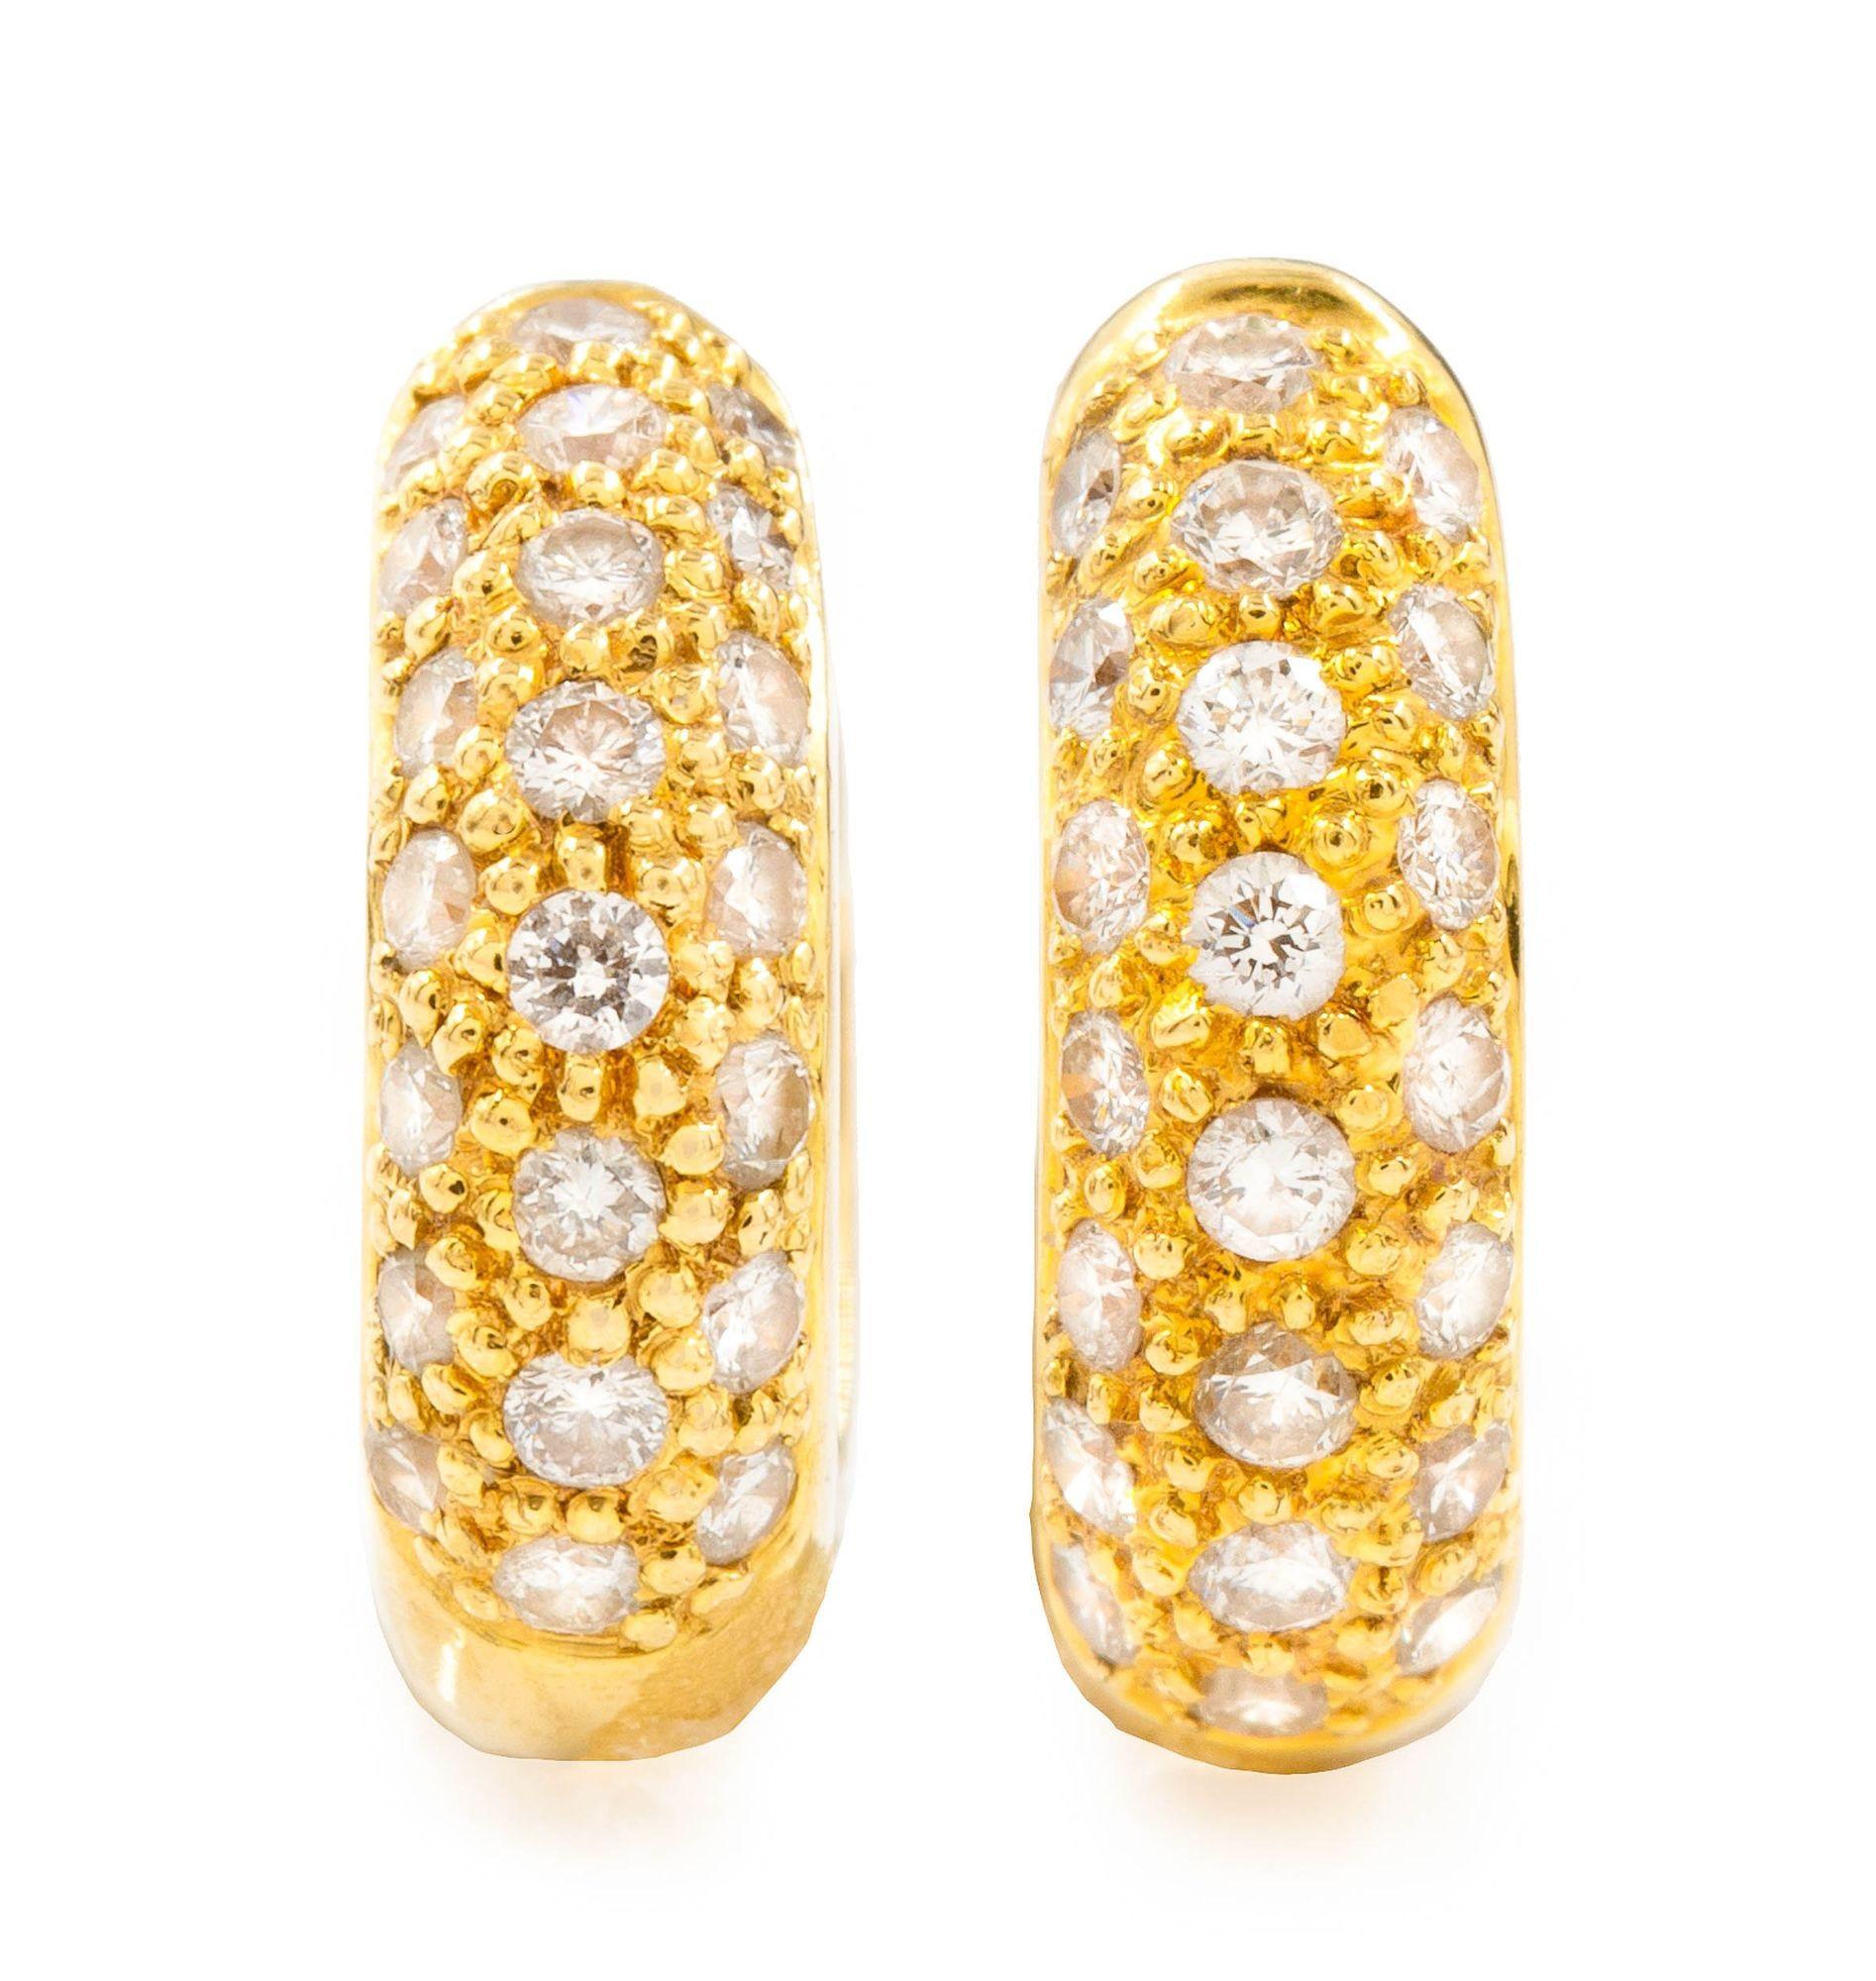 PAIR OF CONTEMPORARY 18 KARAT YELLOW GOLD HUGGIE EARRINGS WITH 44 DIAMONDS
Item # 307CKH29A 

A very attractive pair of huggie earrings executed in solid 18 karat yellow gold, they are a perfect size for everyday wear. With a total diameter of